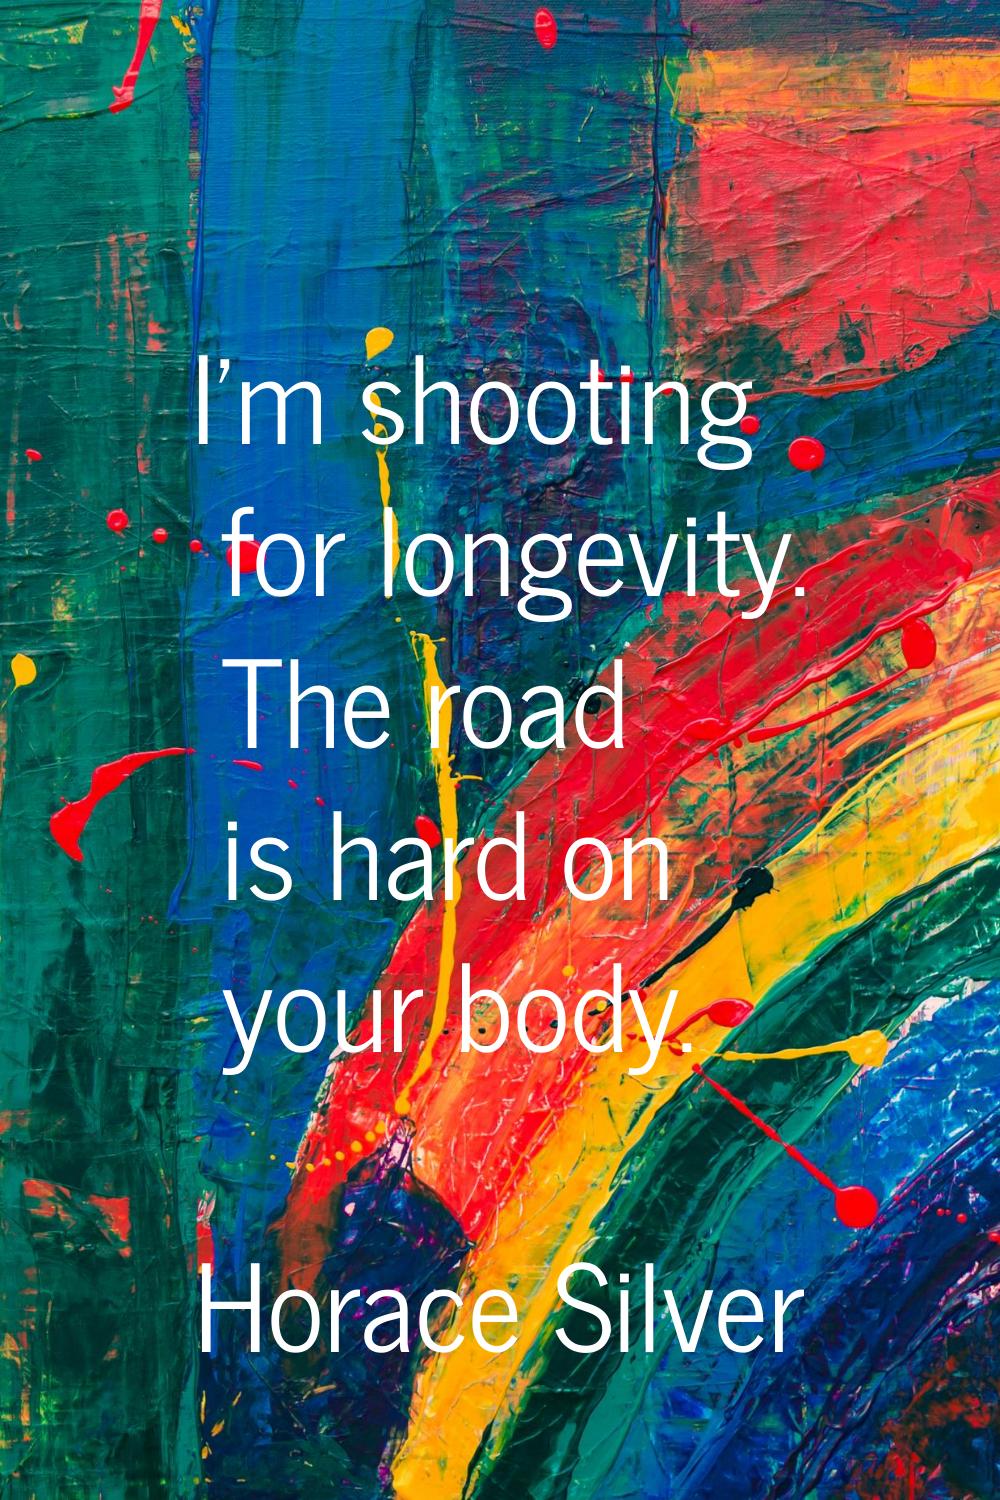 I'm shooting for longevity. The road is hard on your body.